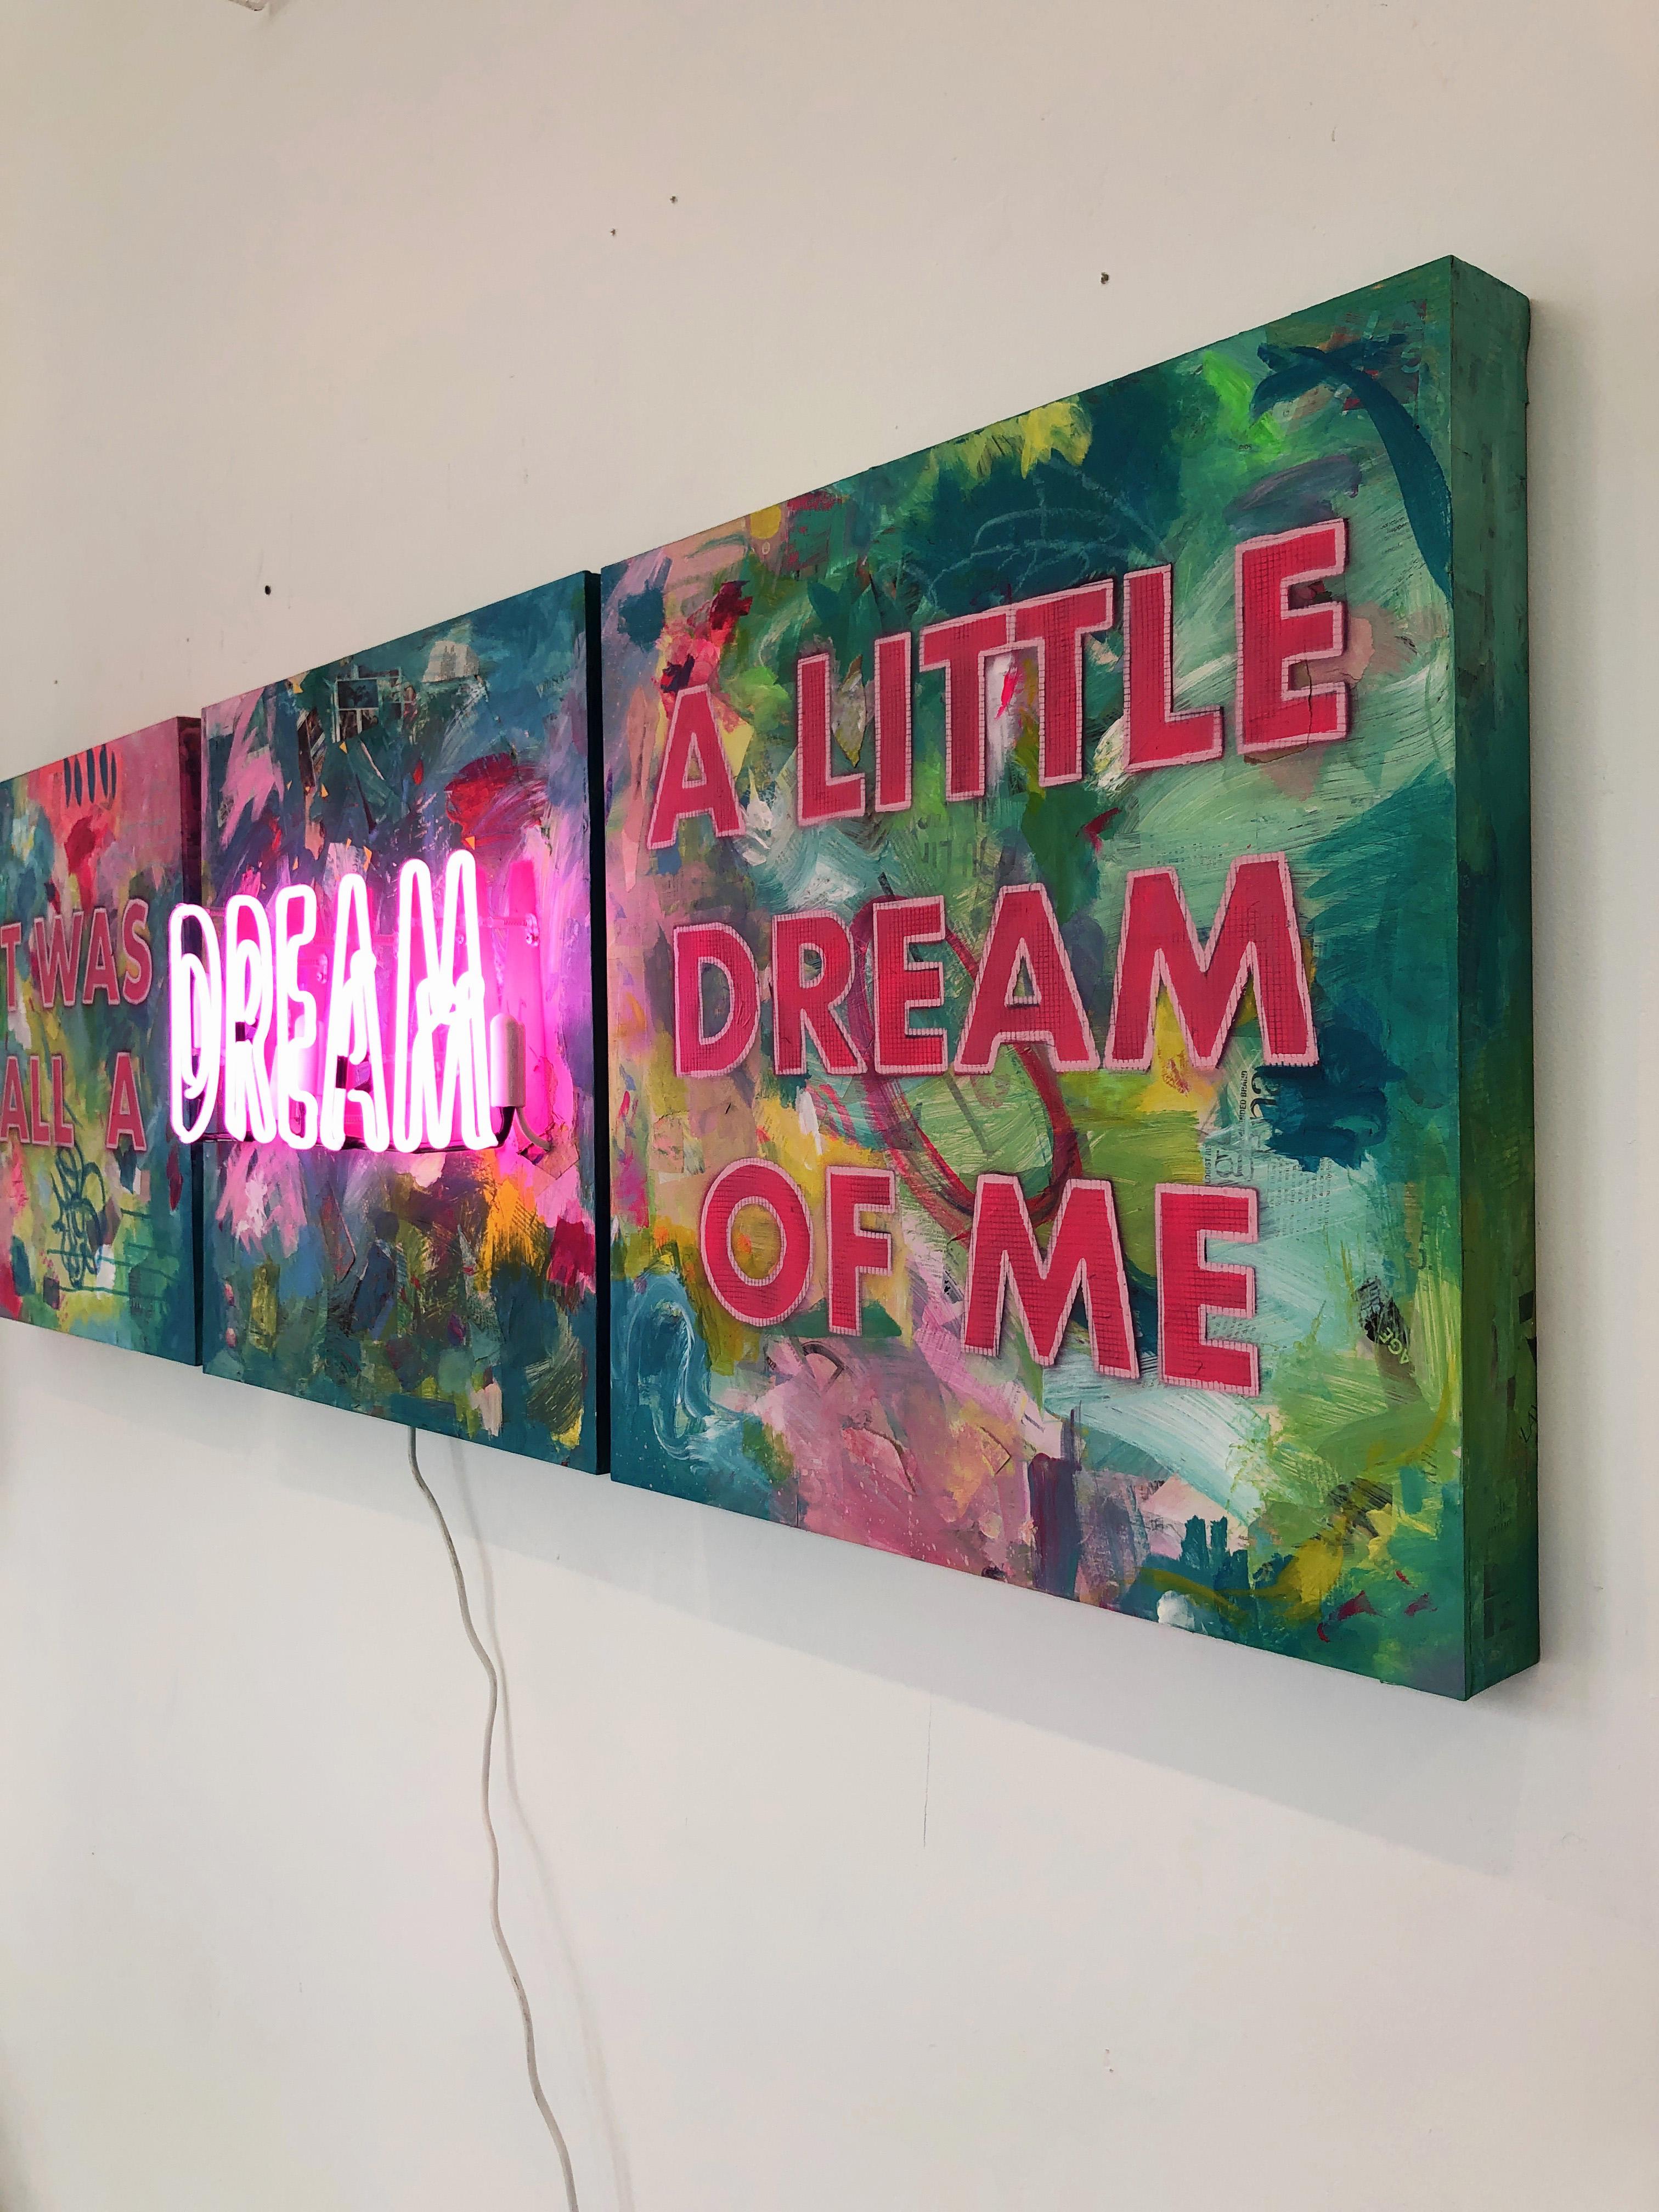  It Was All A Dream A Little Dream of Me - Triptych Acrylic on wood and Neon - Brown Abstract Painting by Amy Smith